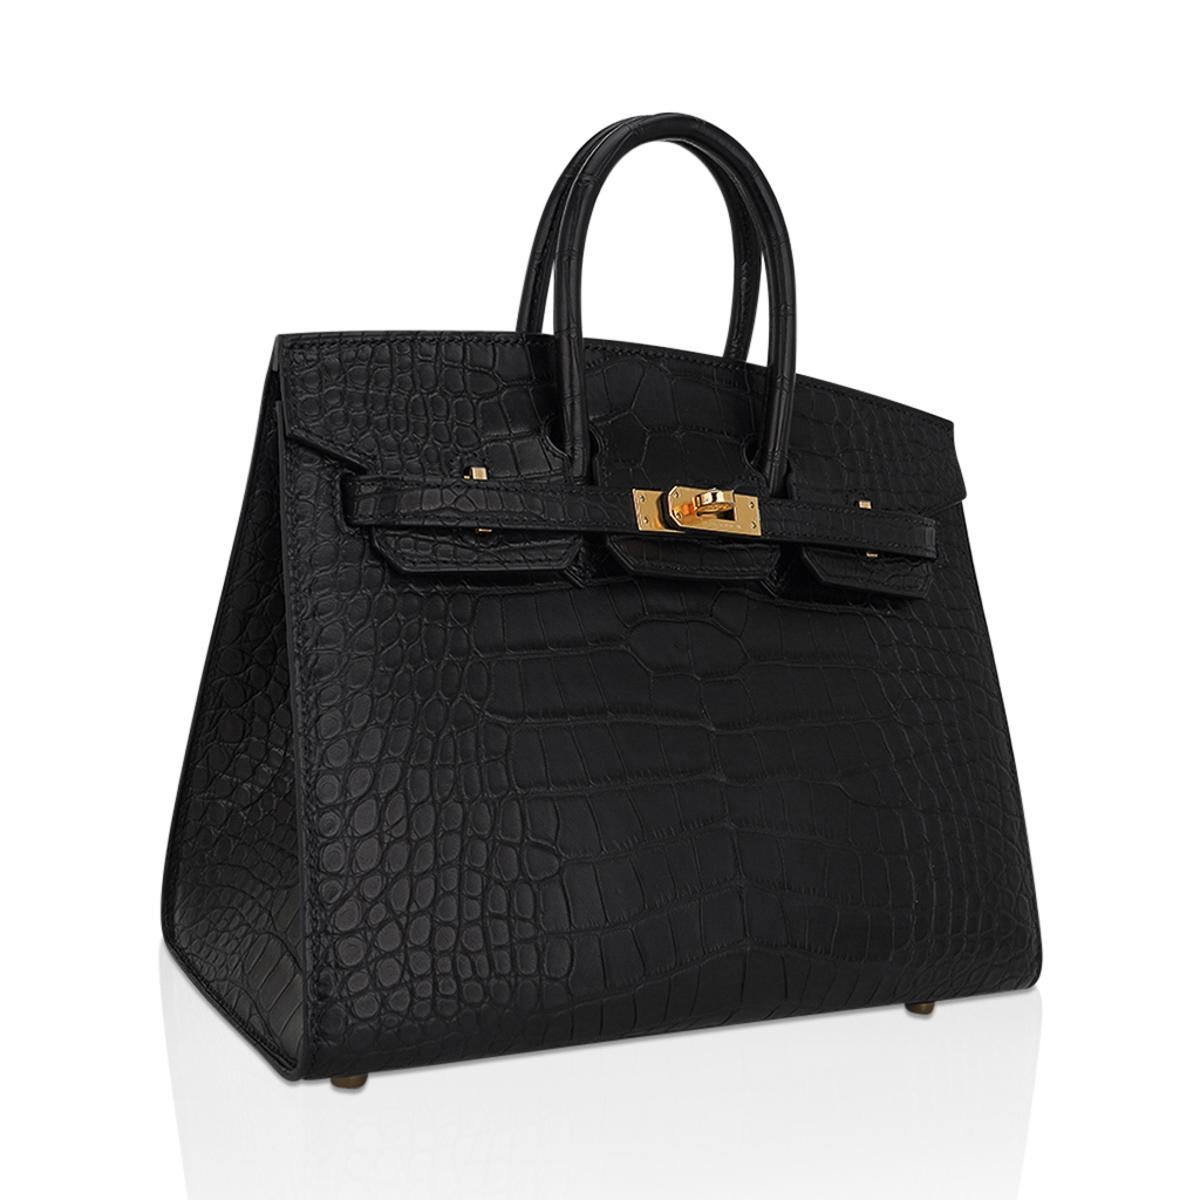 Mightychic offers an Hermes Birkin Sellier 25 bag featured in Black matte alligator.
Timeless with rich gold hardware.
The Sellier Birkin is an exquisite modern and minimalist Hermes bag. 
A sleek pared down version that exudes chic